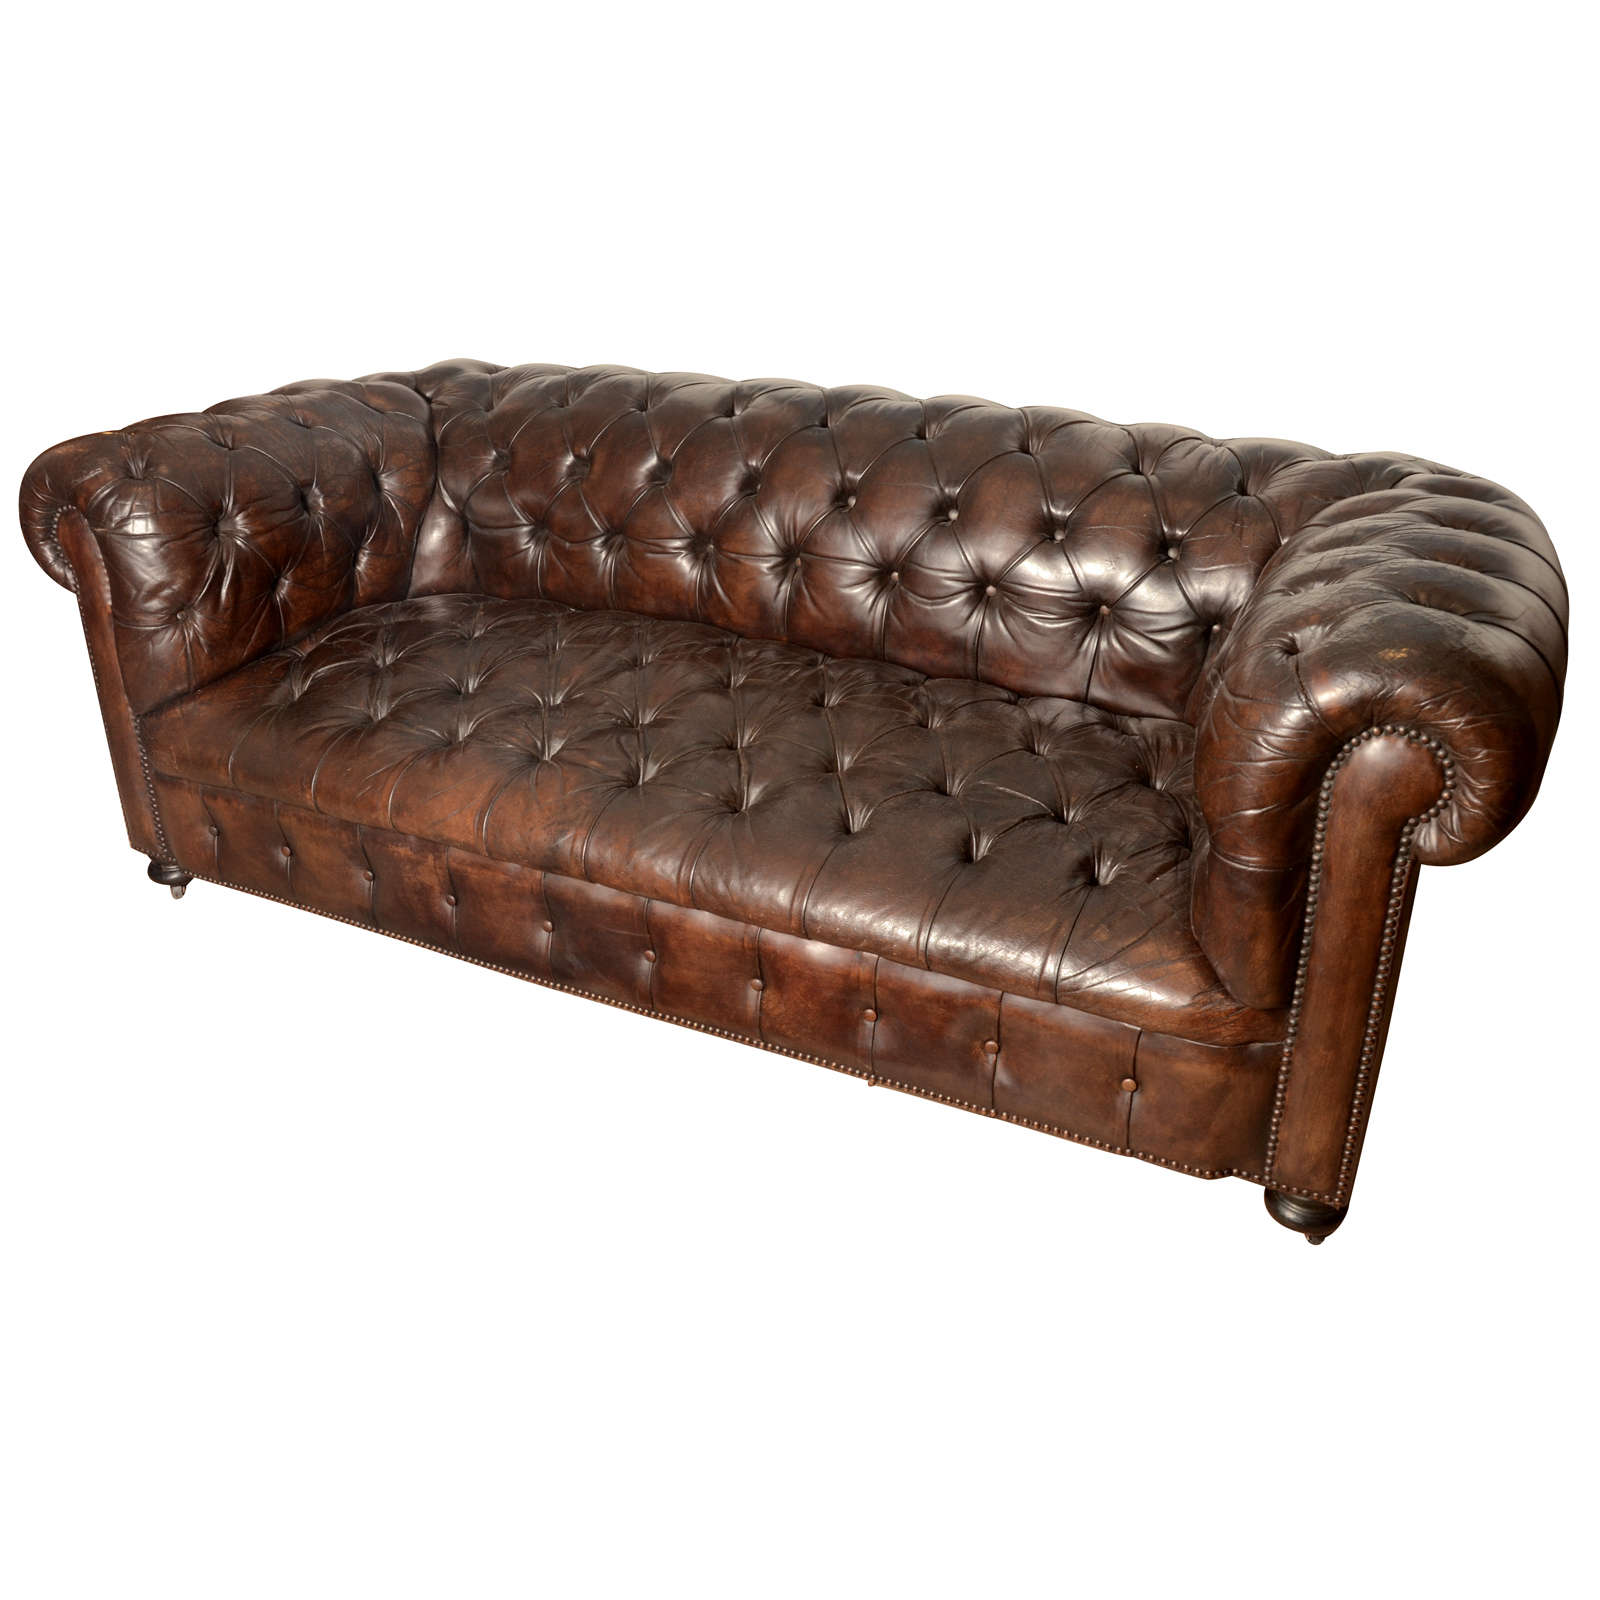 Chesterfield Chair For Sale Online Hotsell, UP TO 65% OFF |  www.quirurgica.com